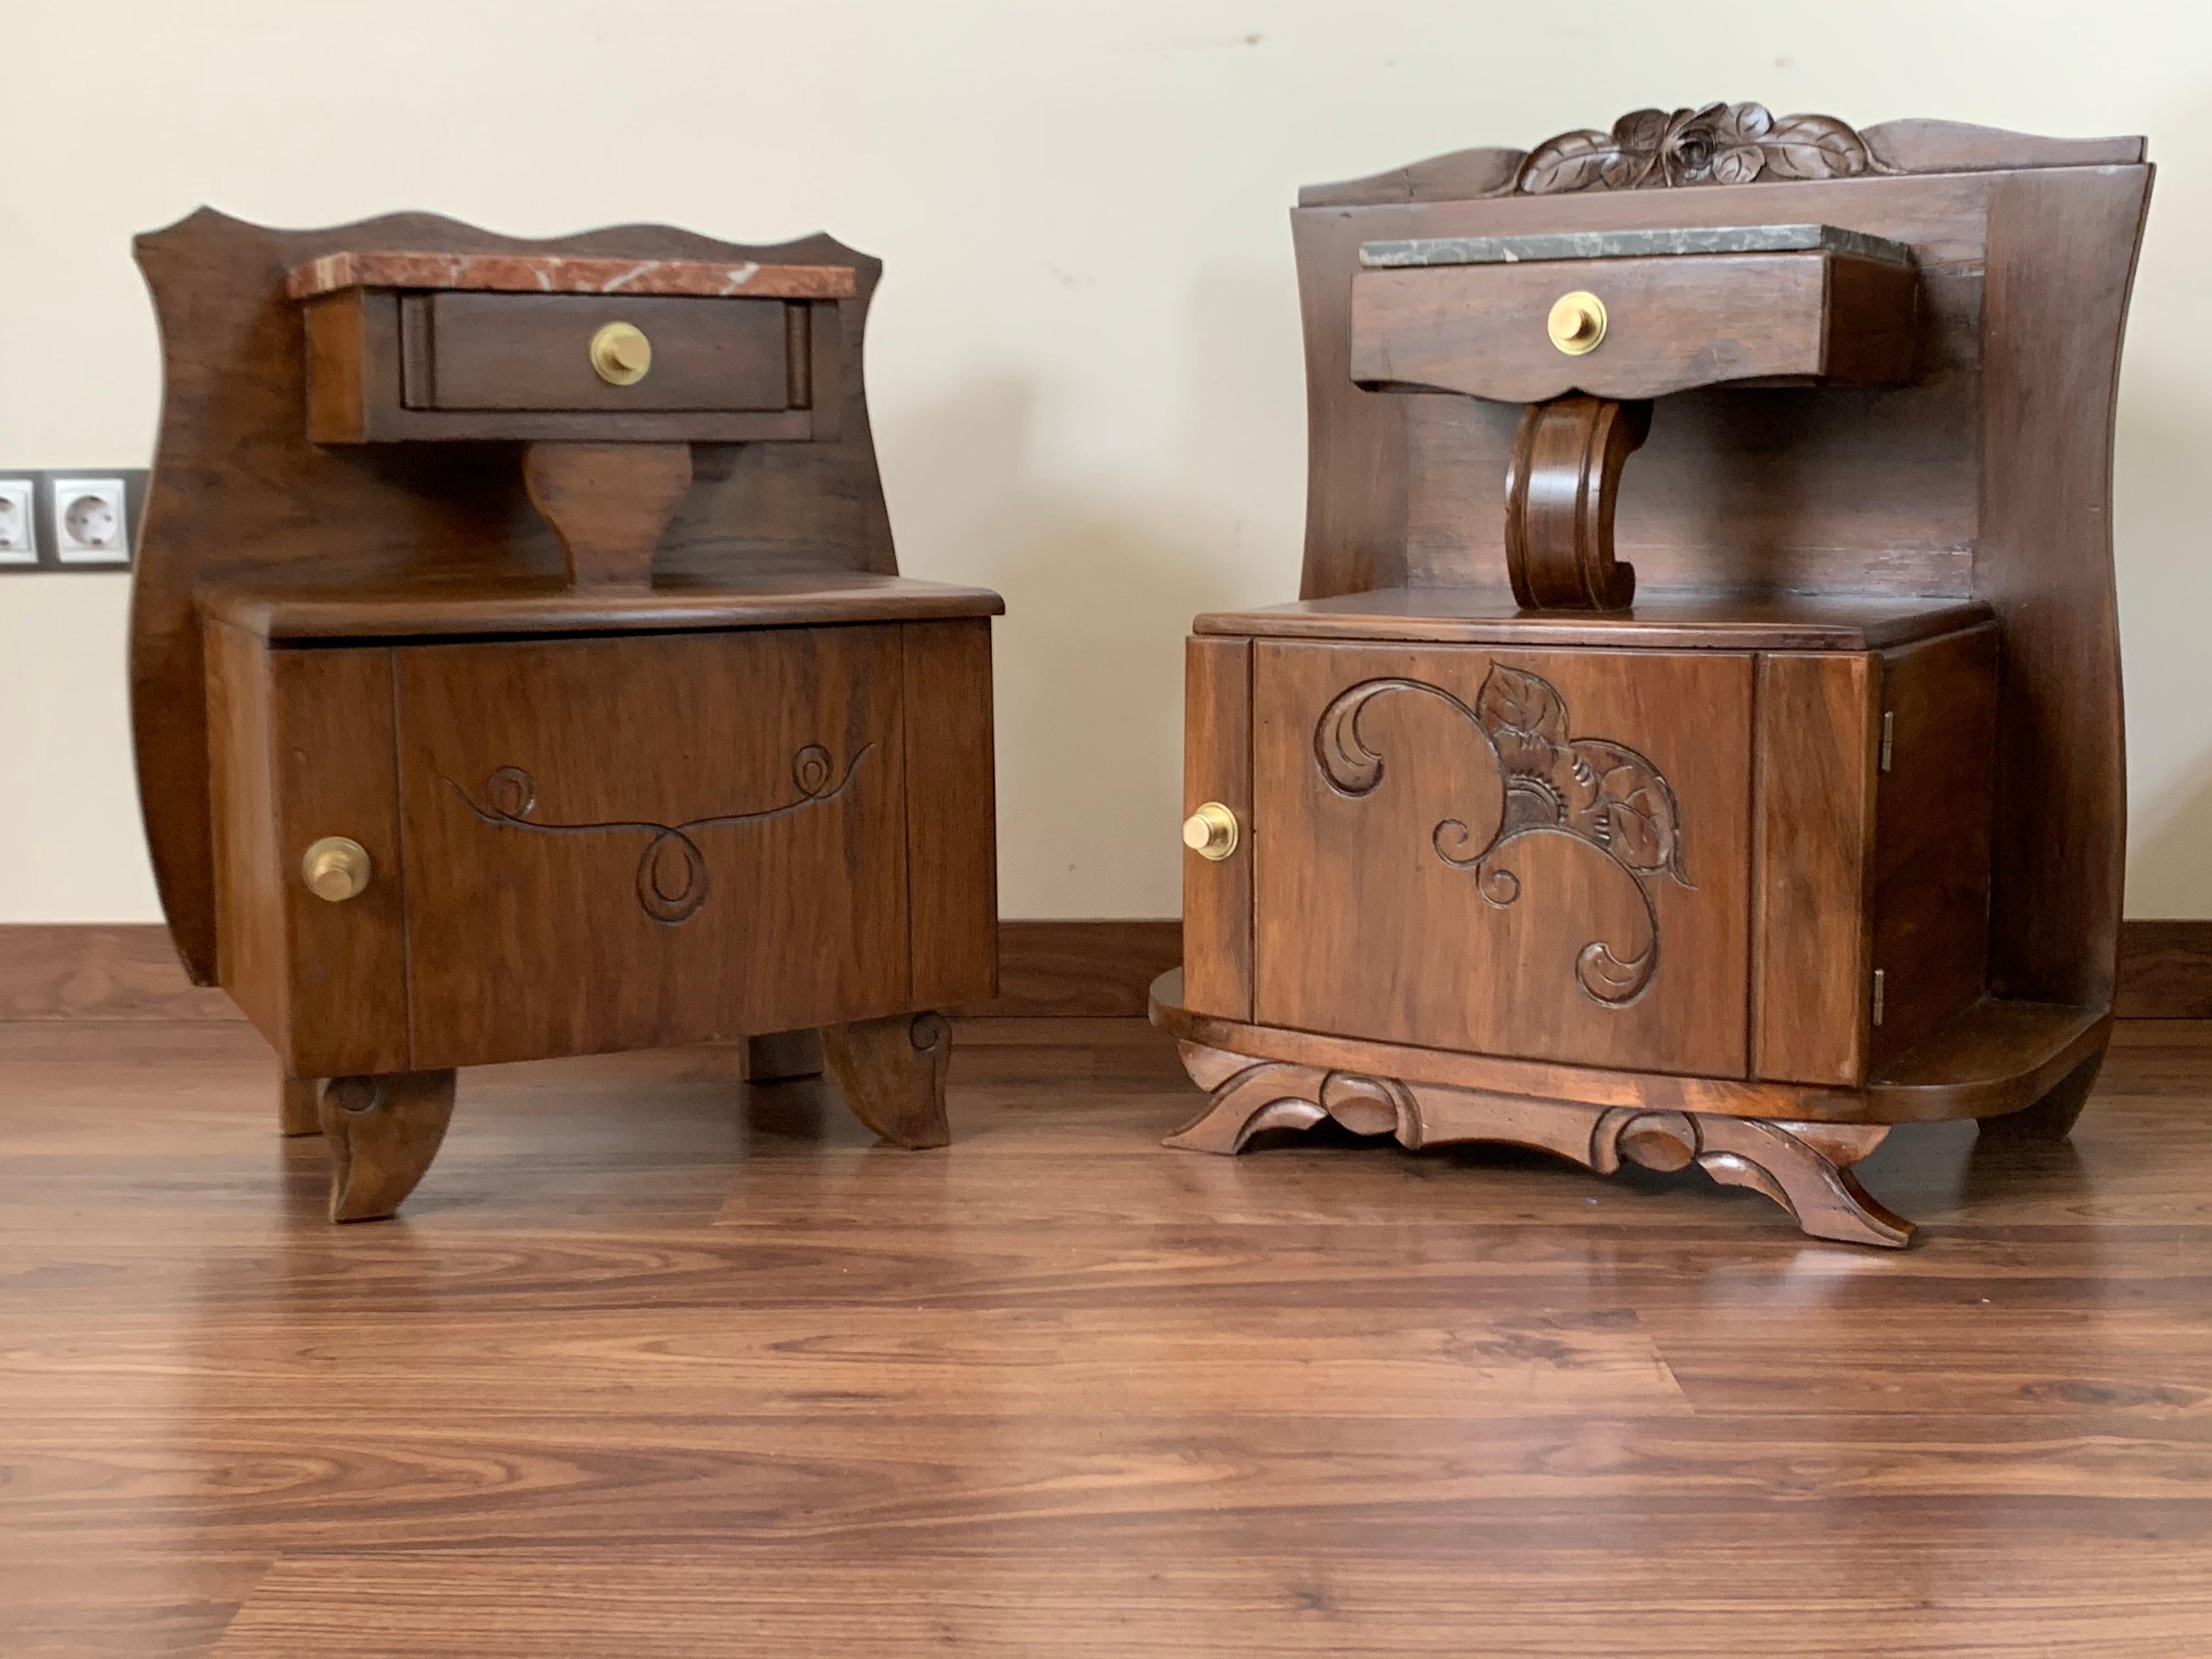 French Art Nouveau Carved Nightstands / Bedside Tables with Marble Top, circa 1900 For Sale